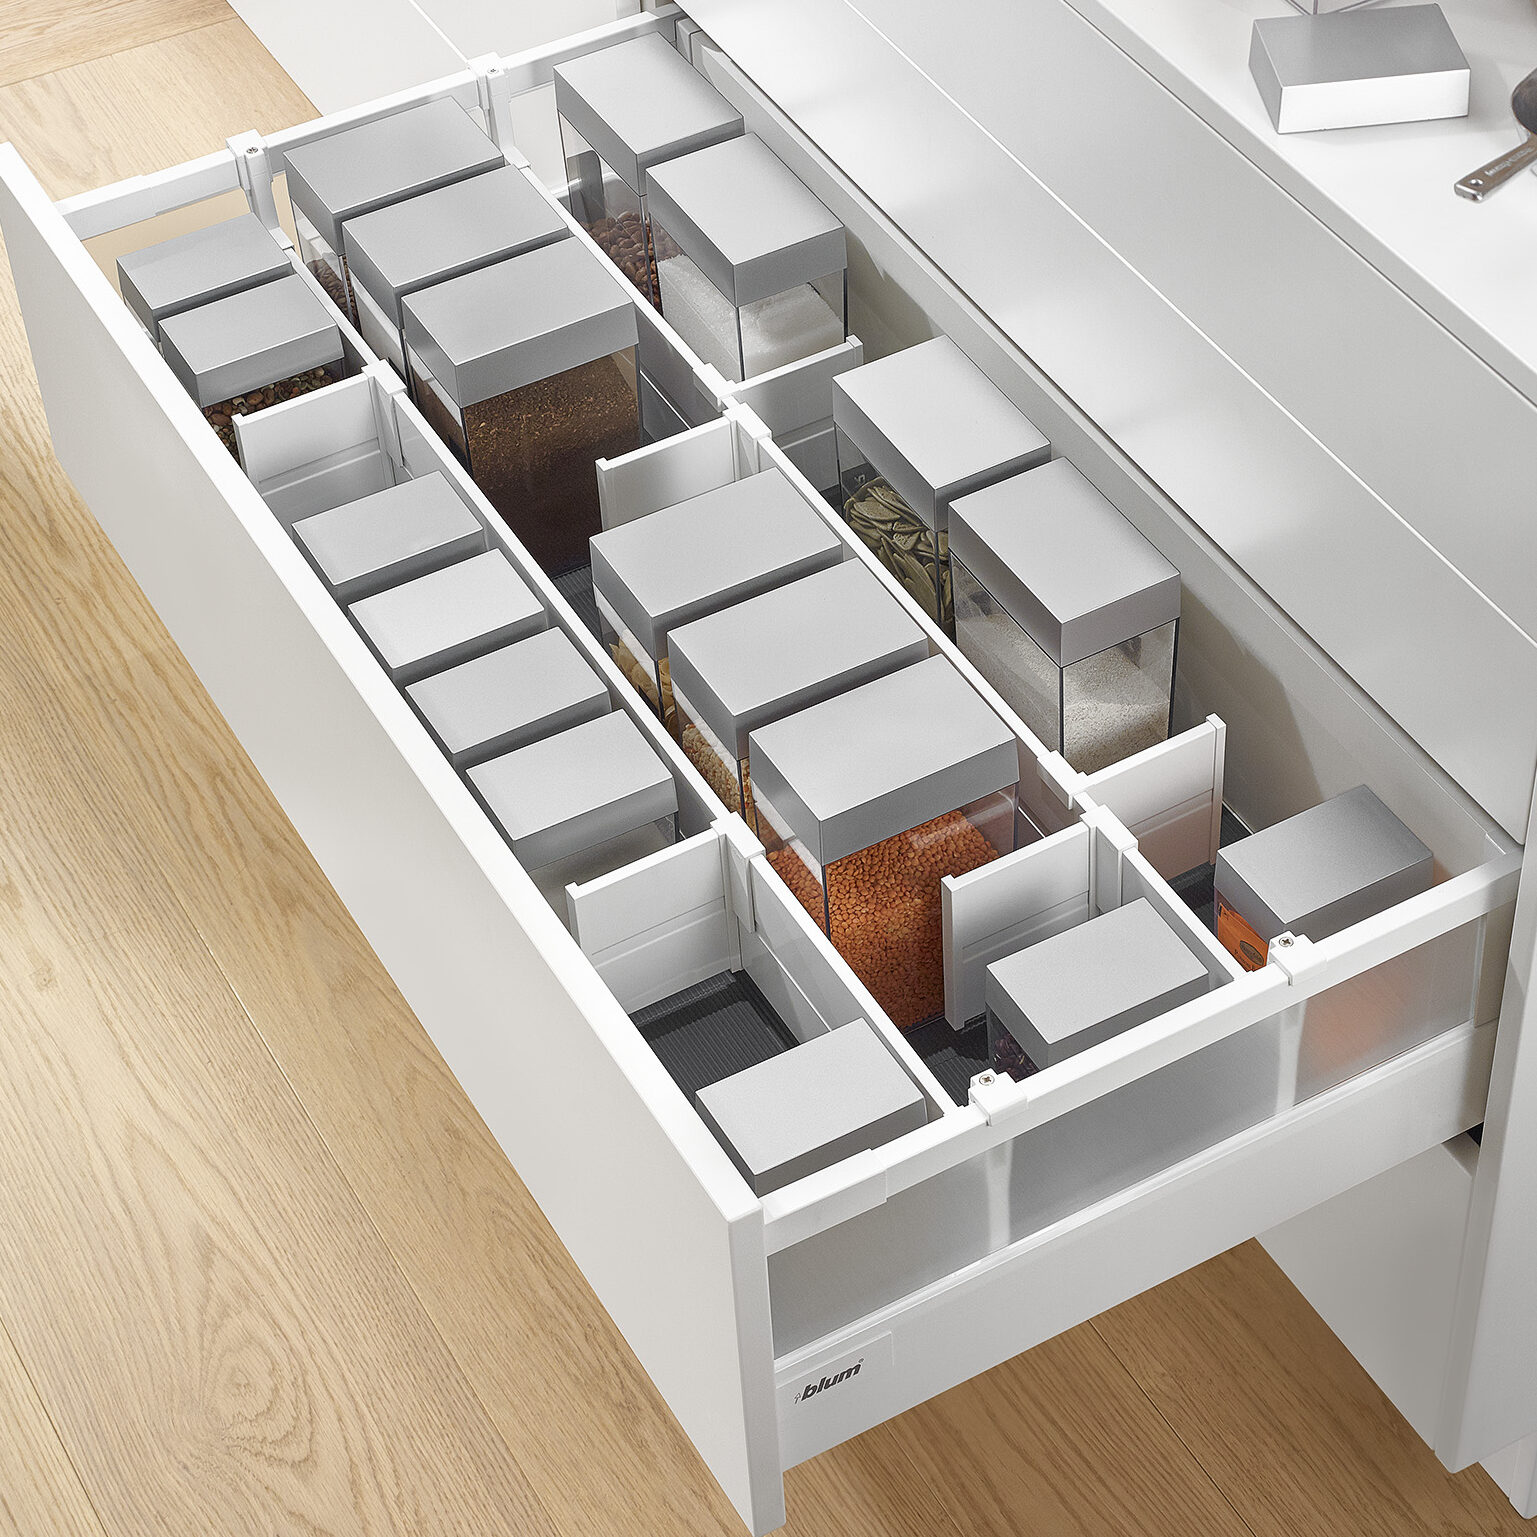 Orga-line drawer dividers provide easy to use storage areas